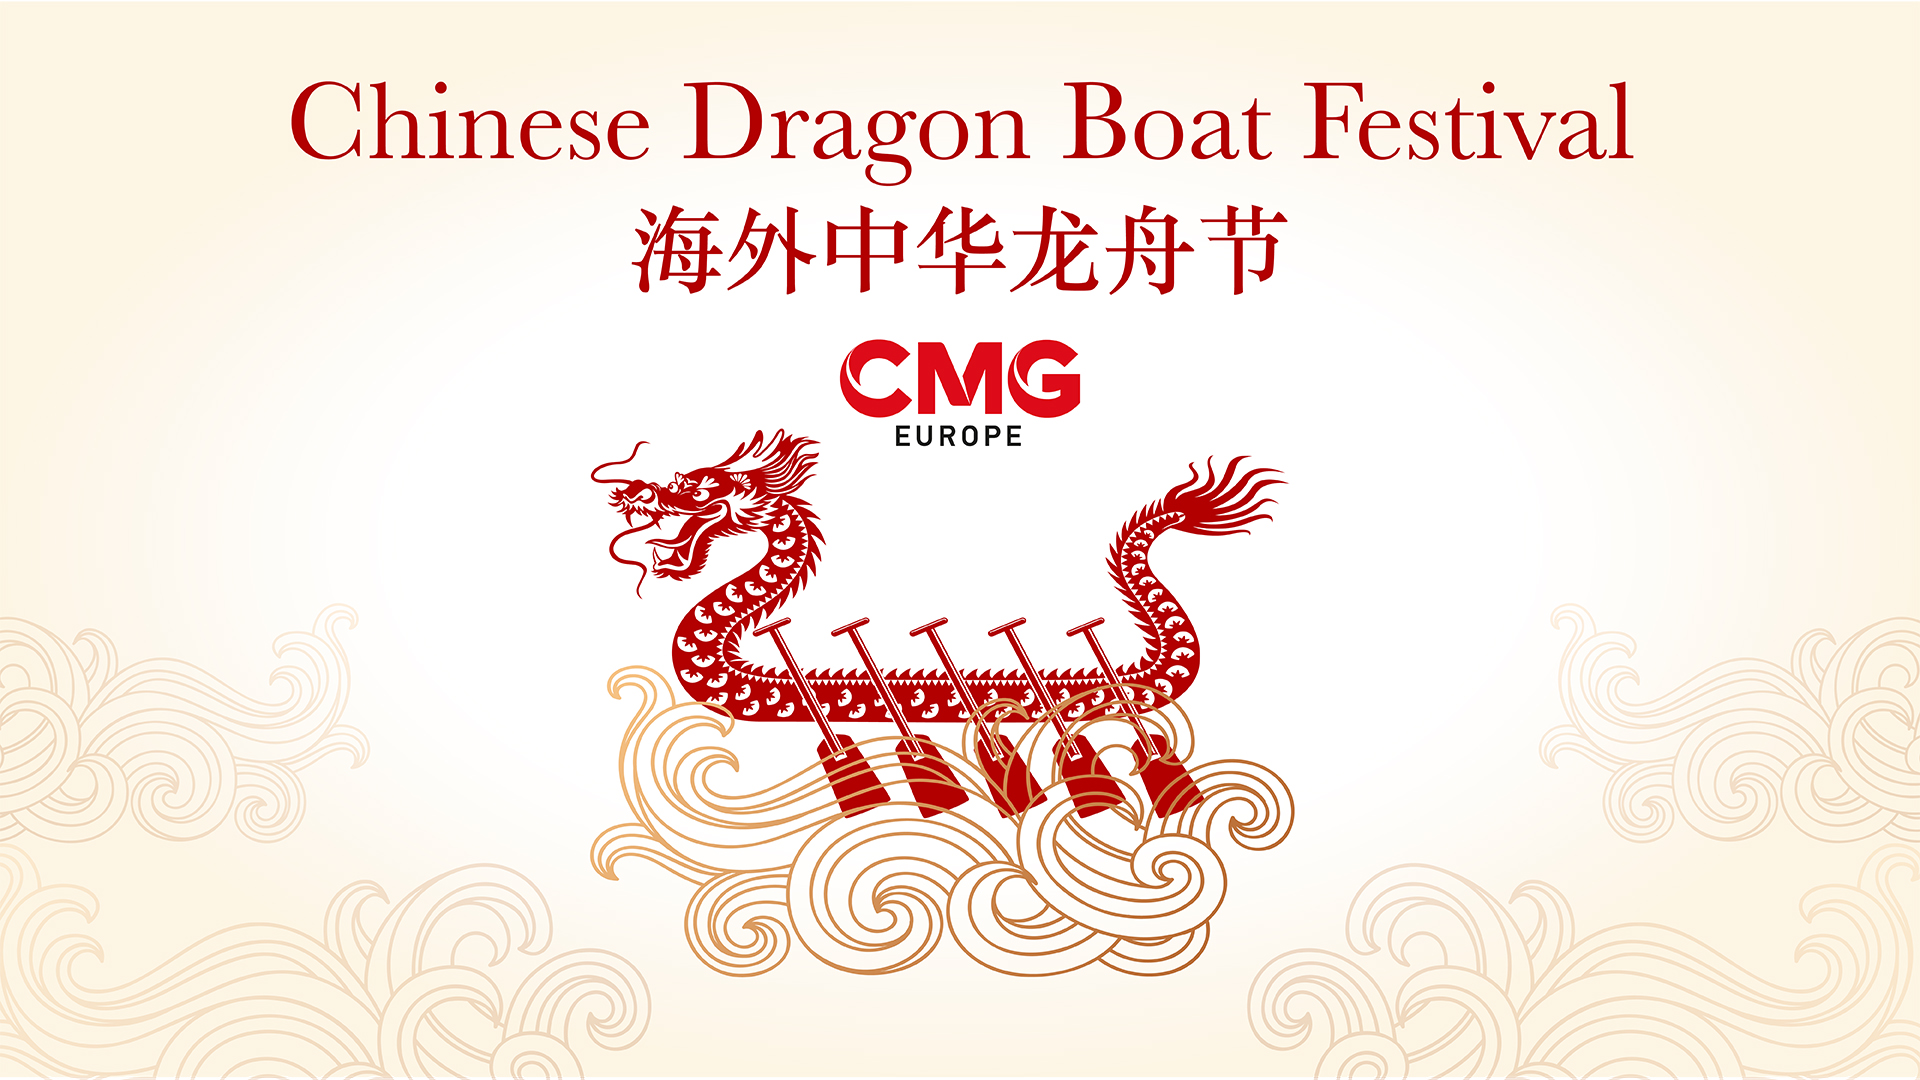 UK Chinese Dragon Boat Festival makes a splash in Manchester